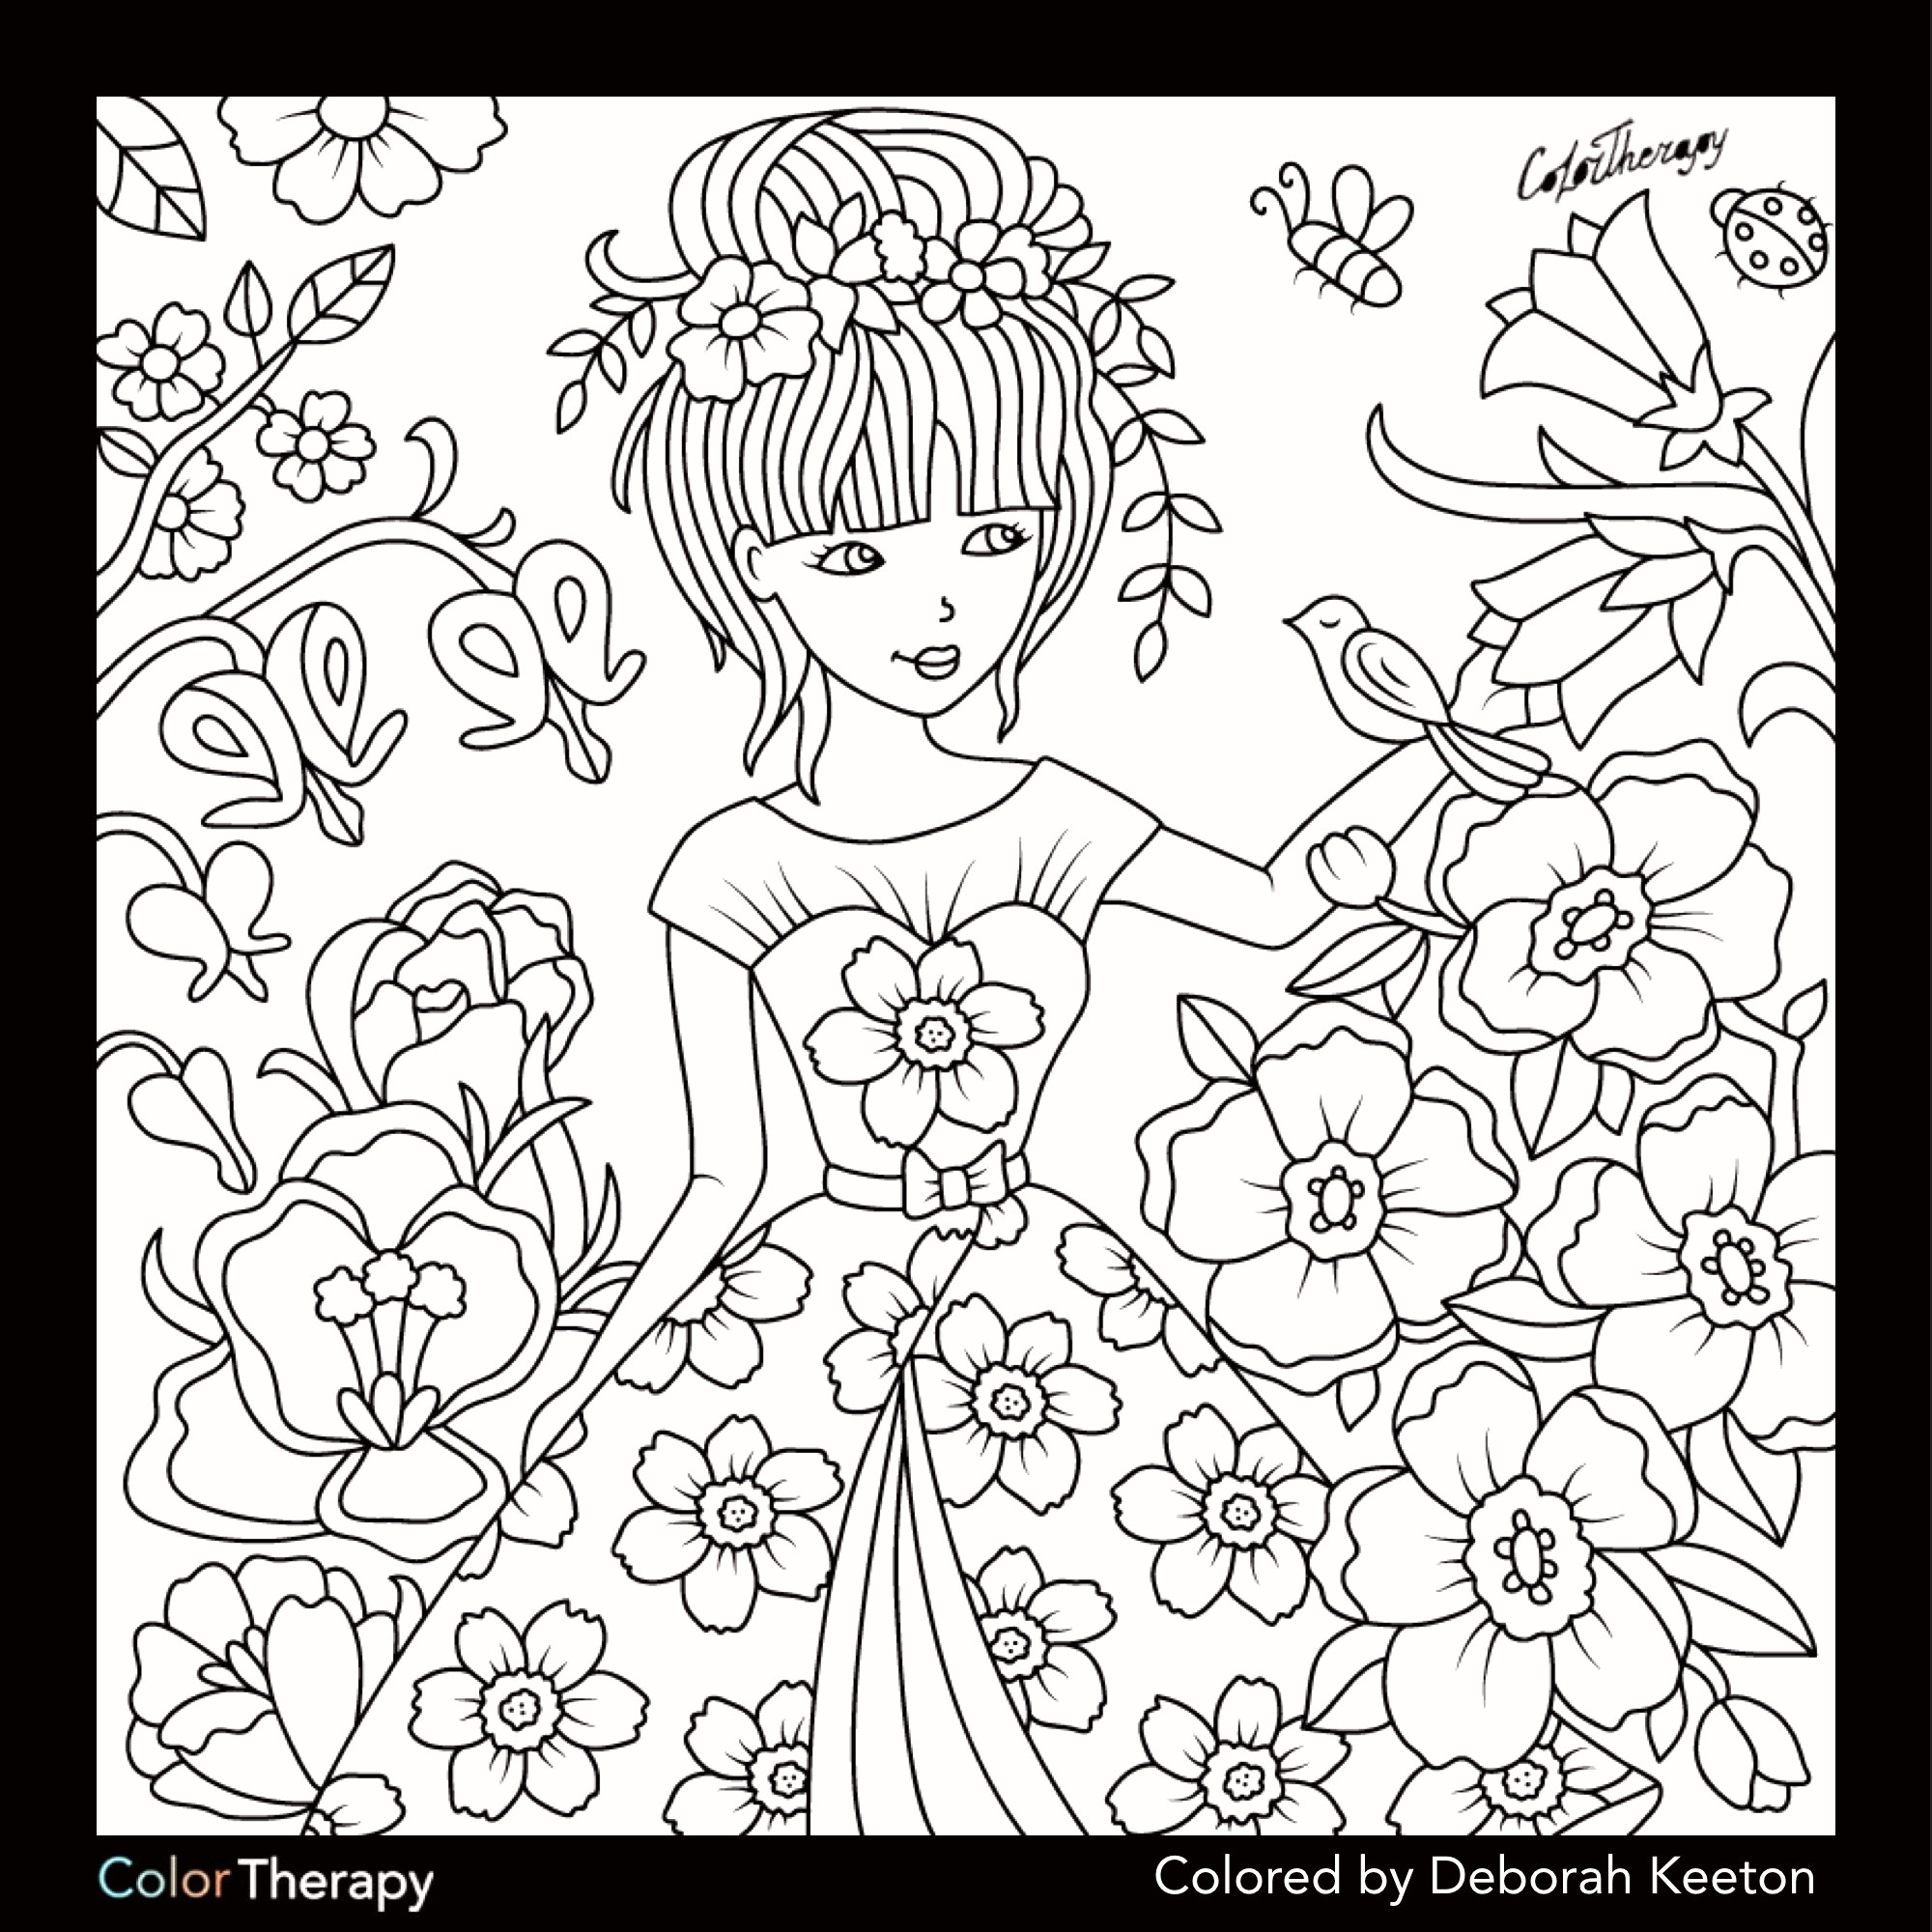 25 Popular White Owl Vase 2023 free download white owl vase of coloring pages elegant free owl coloring pages elegant printable cds within coloring pages luxury moana coloring pages beautiful cool vases flower vase coloring page of col